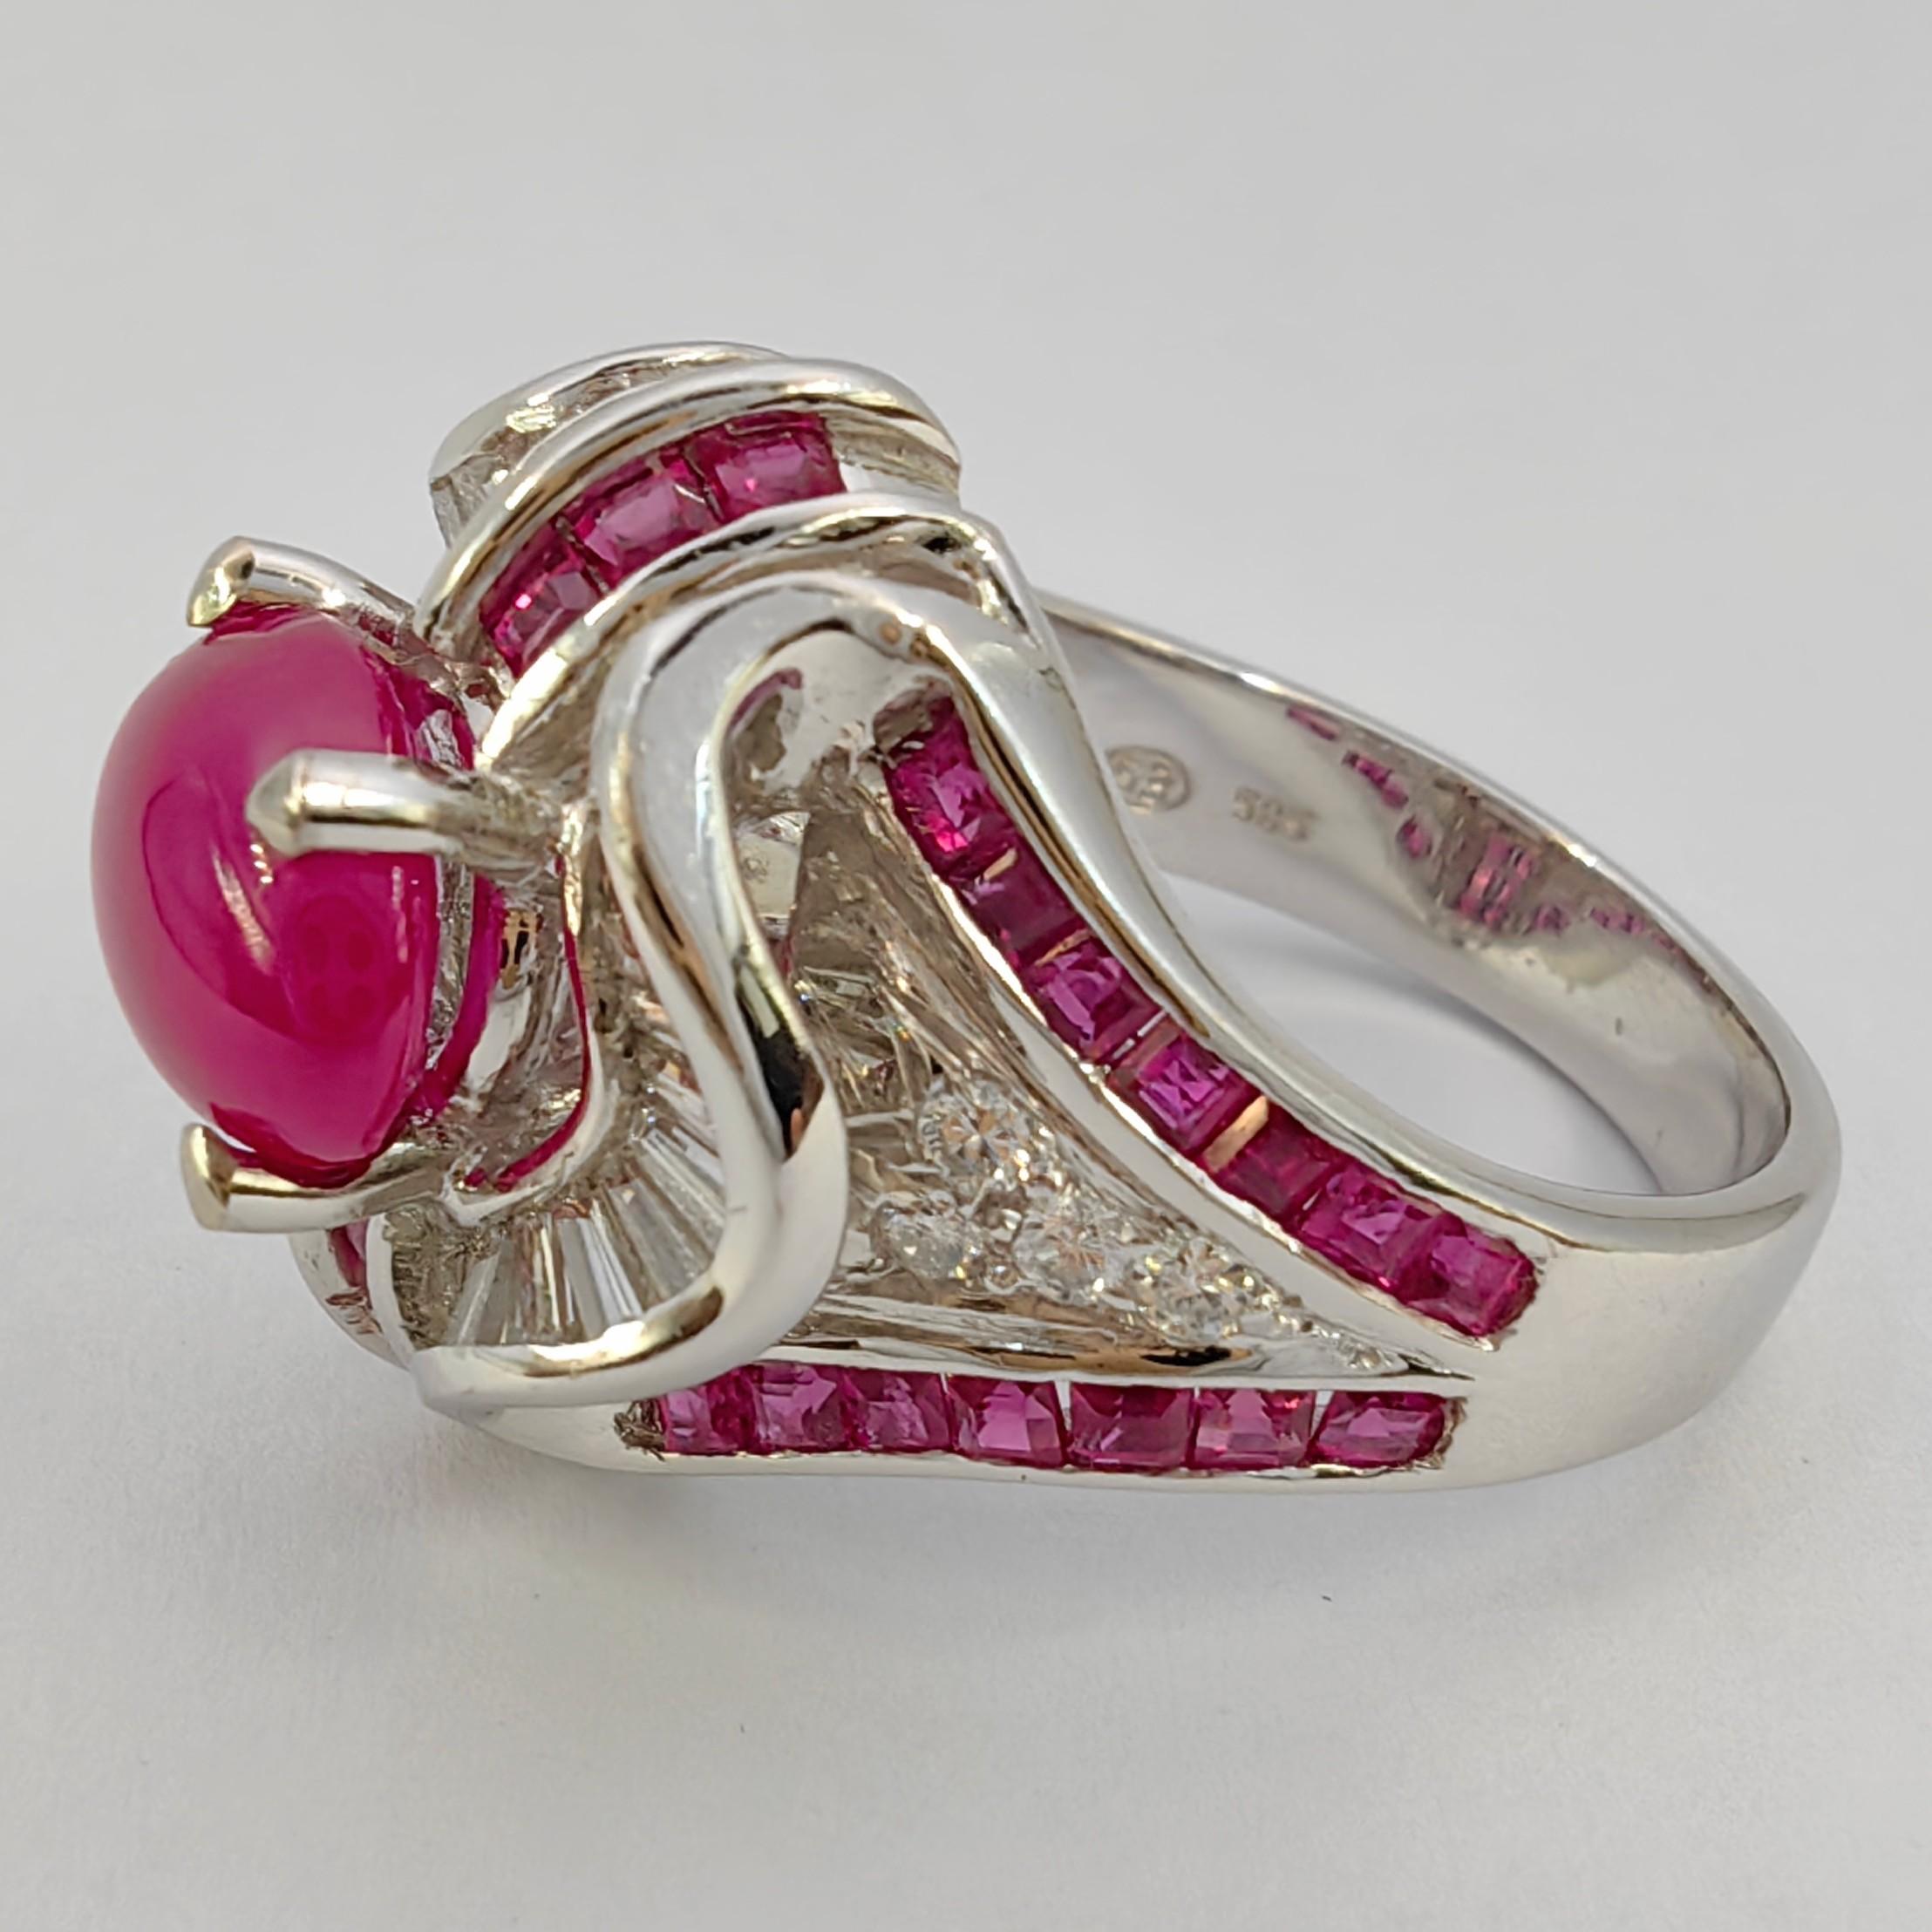 Art Deco 2.91 Carat Cabochon Ruby Diamond Ring in 14K White Gold For Sale 1